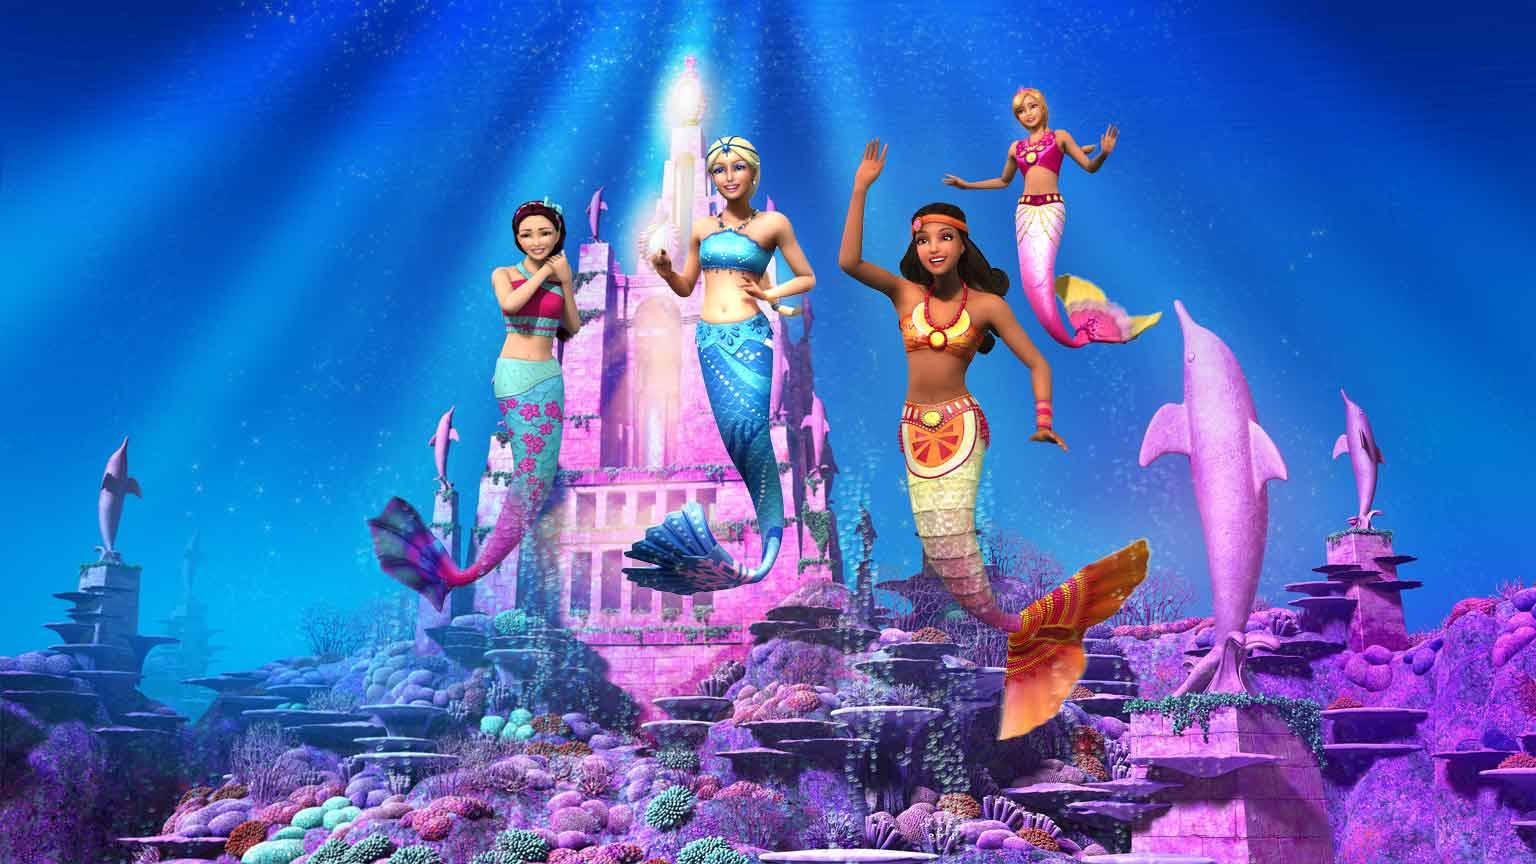 barbie in a mermaid tale wallpapers high quality